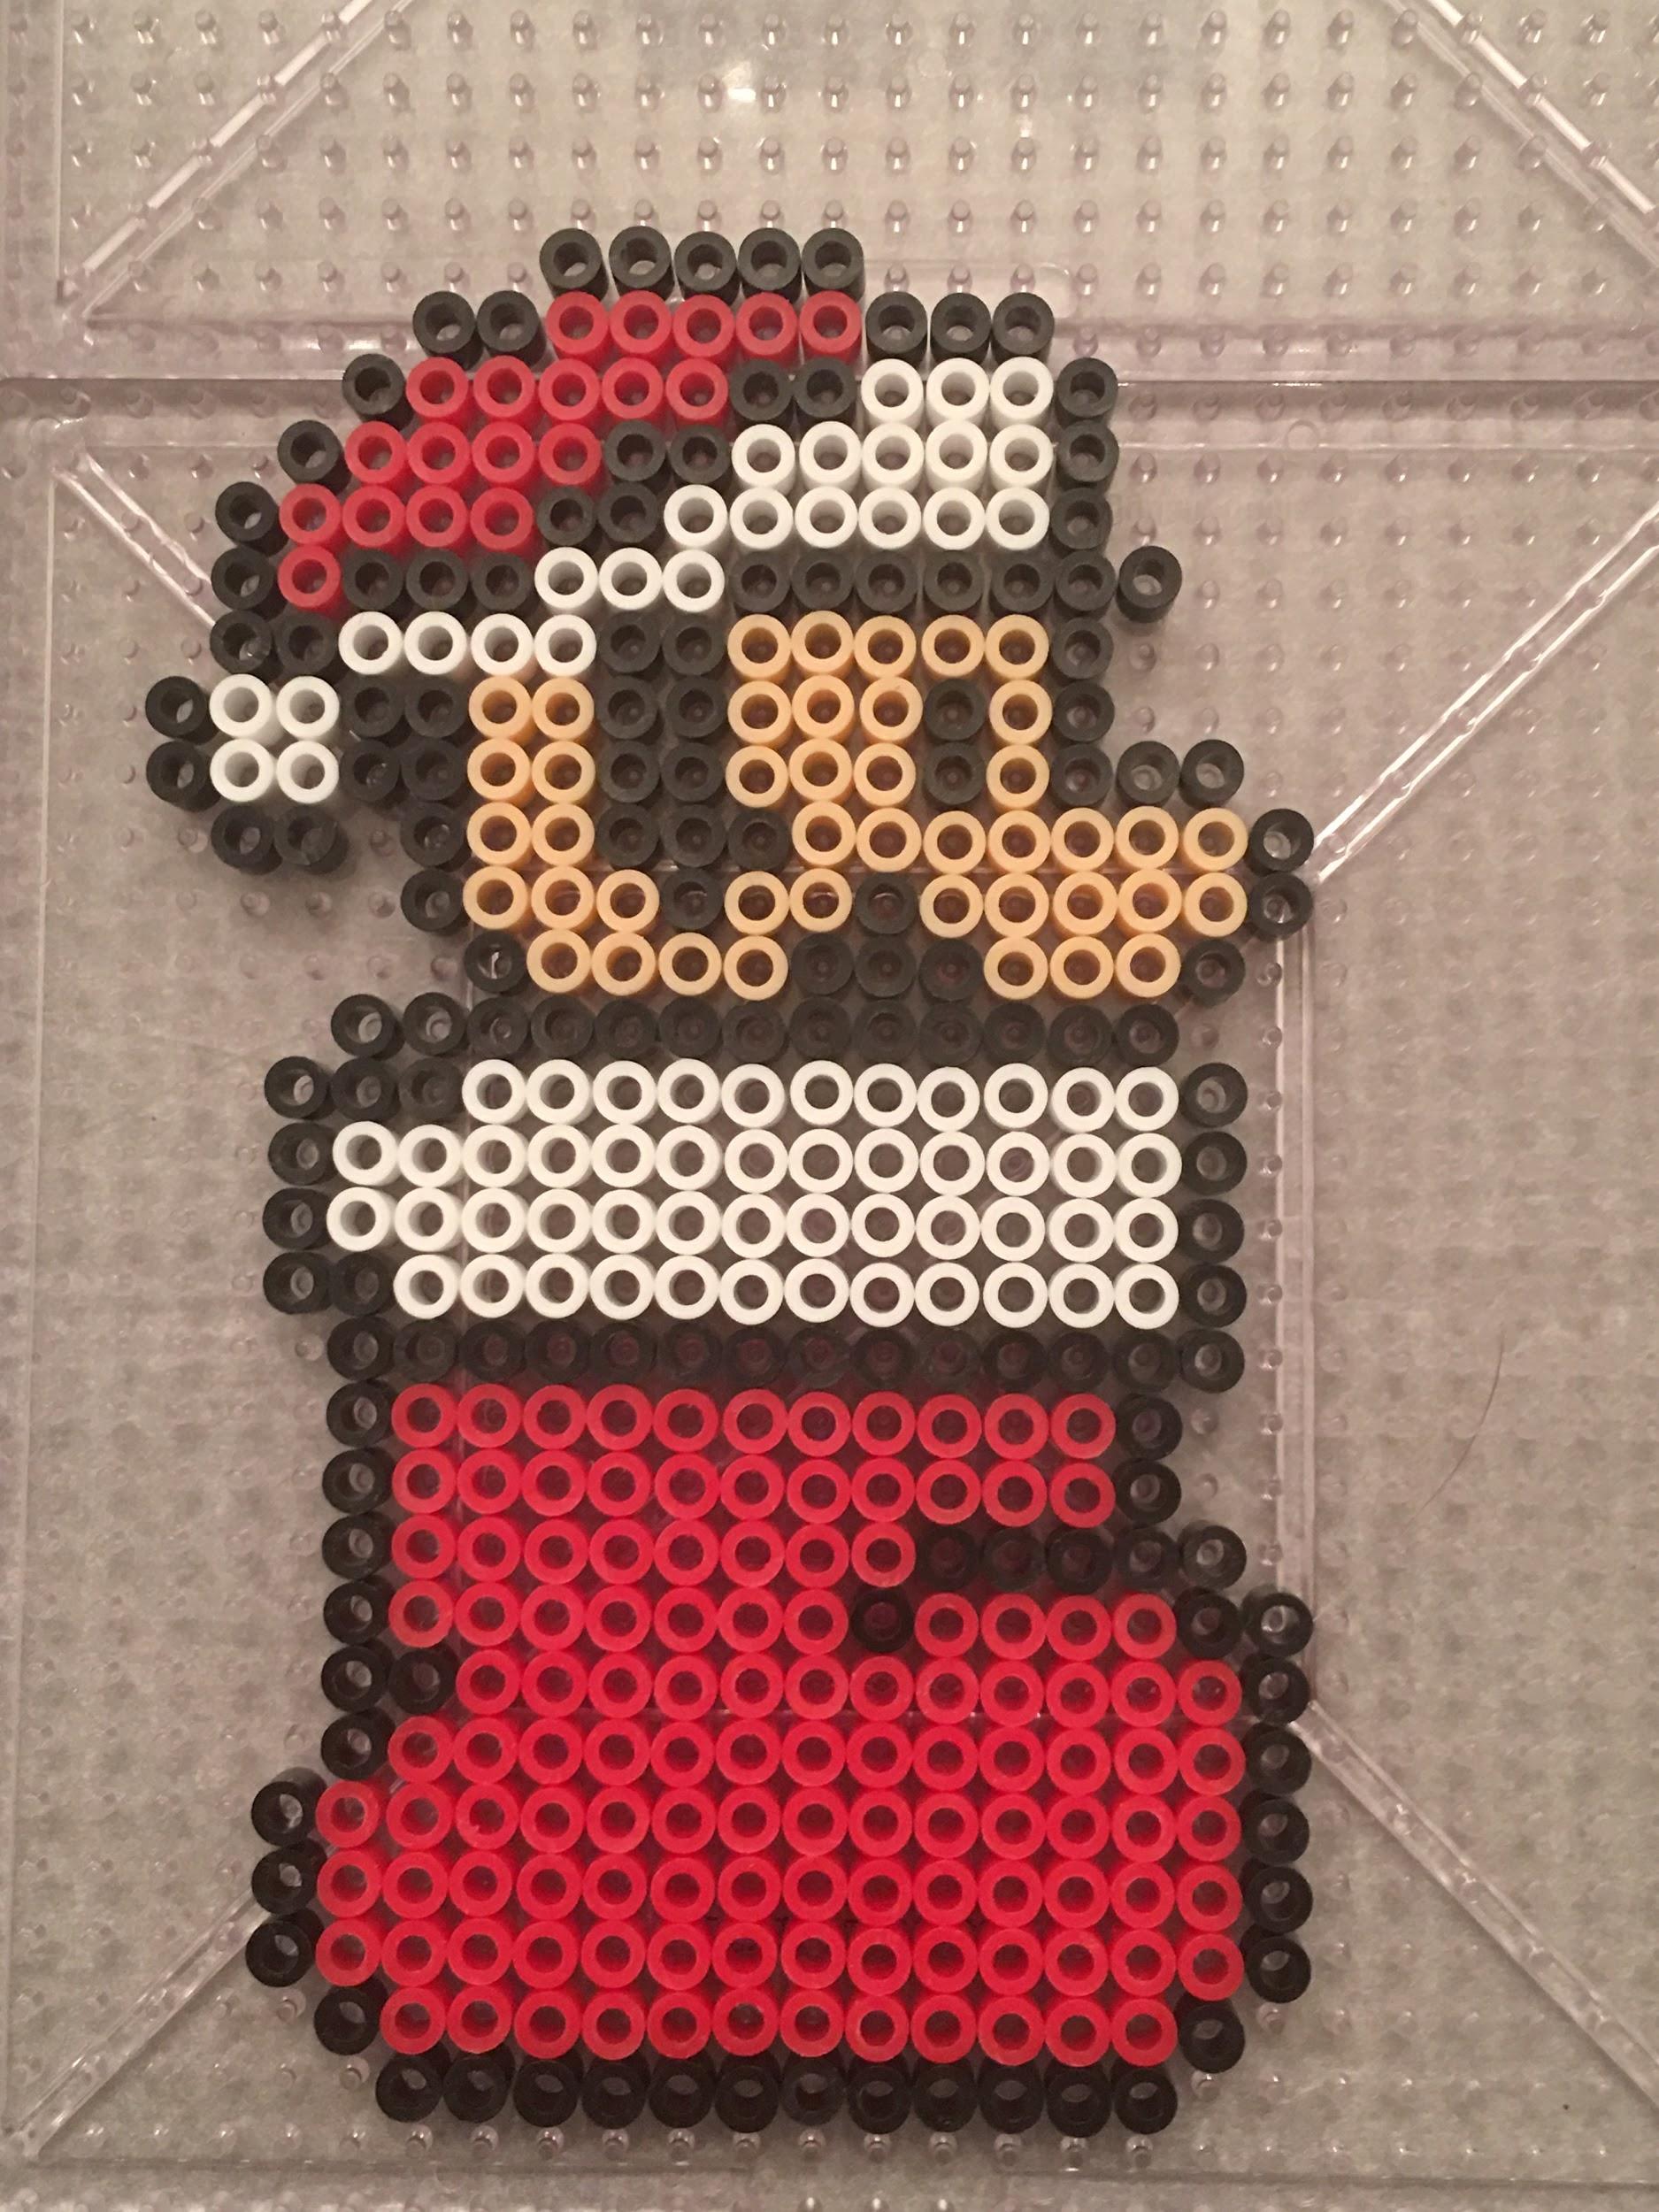 Super Mario Perler Bead Christmas Ornaments – For Parents,Teachers, Scout  Leaders & Really Just Everyone!